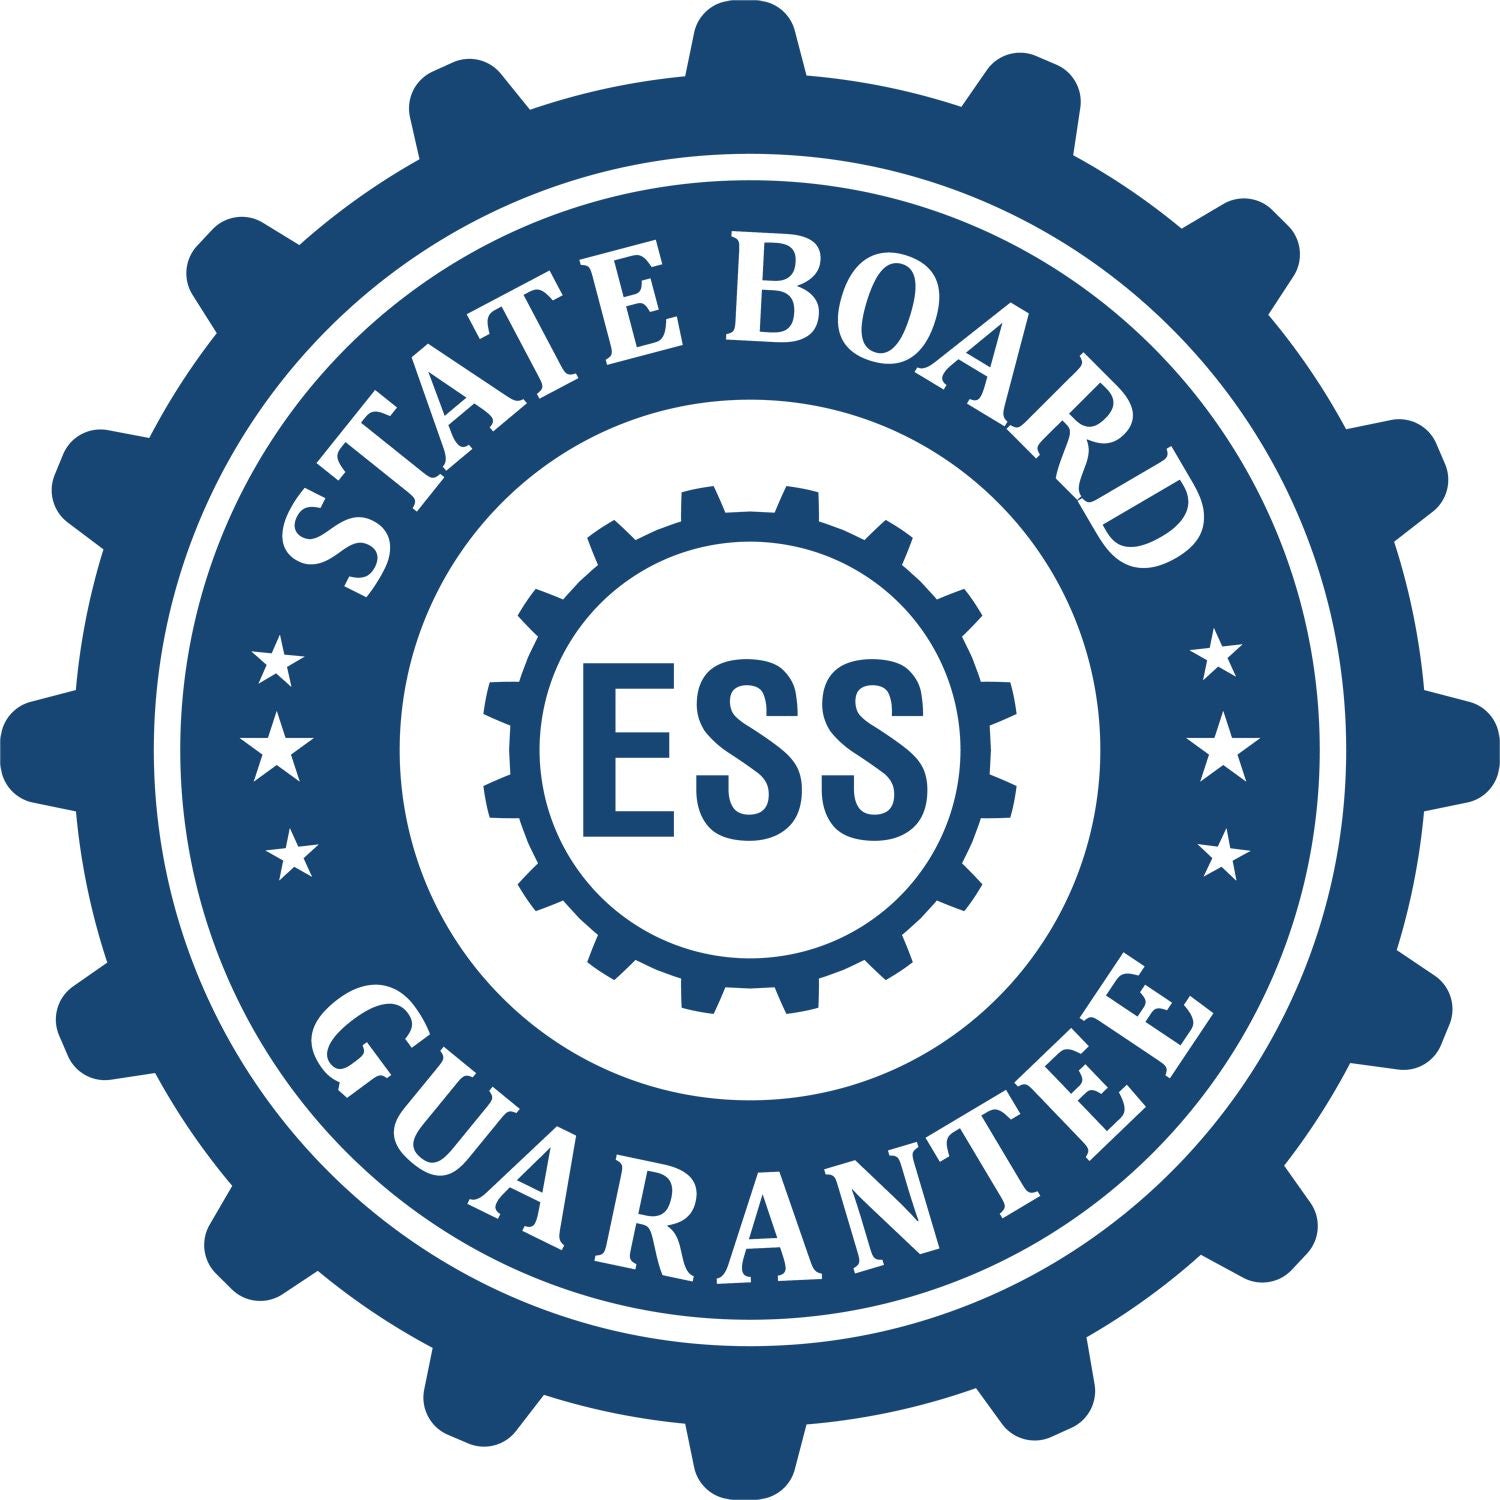 An emblem in a gear shape illustrating a state board guarantee for the Digital Michigan Landscape Architect Stamp product.